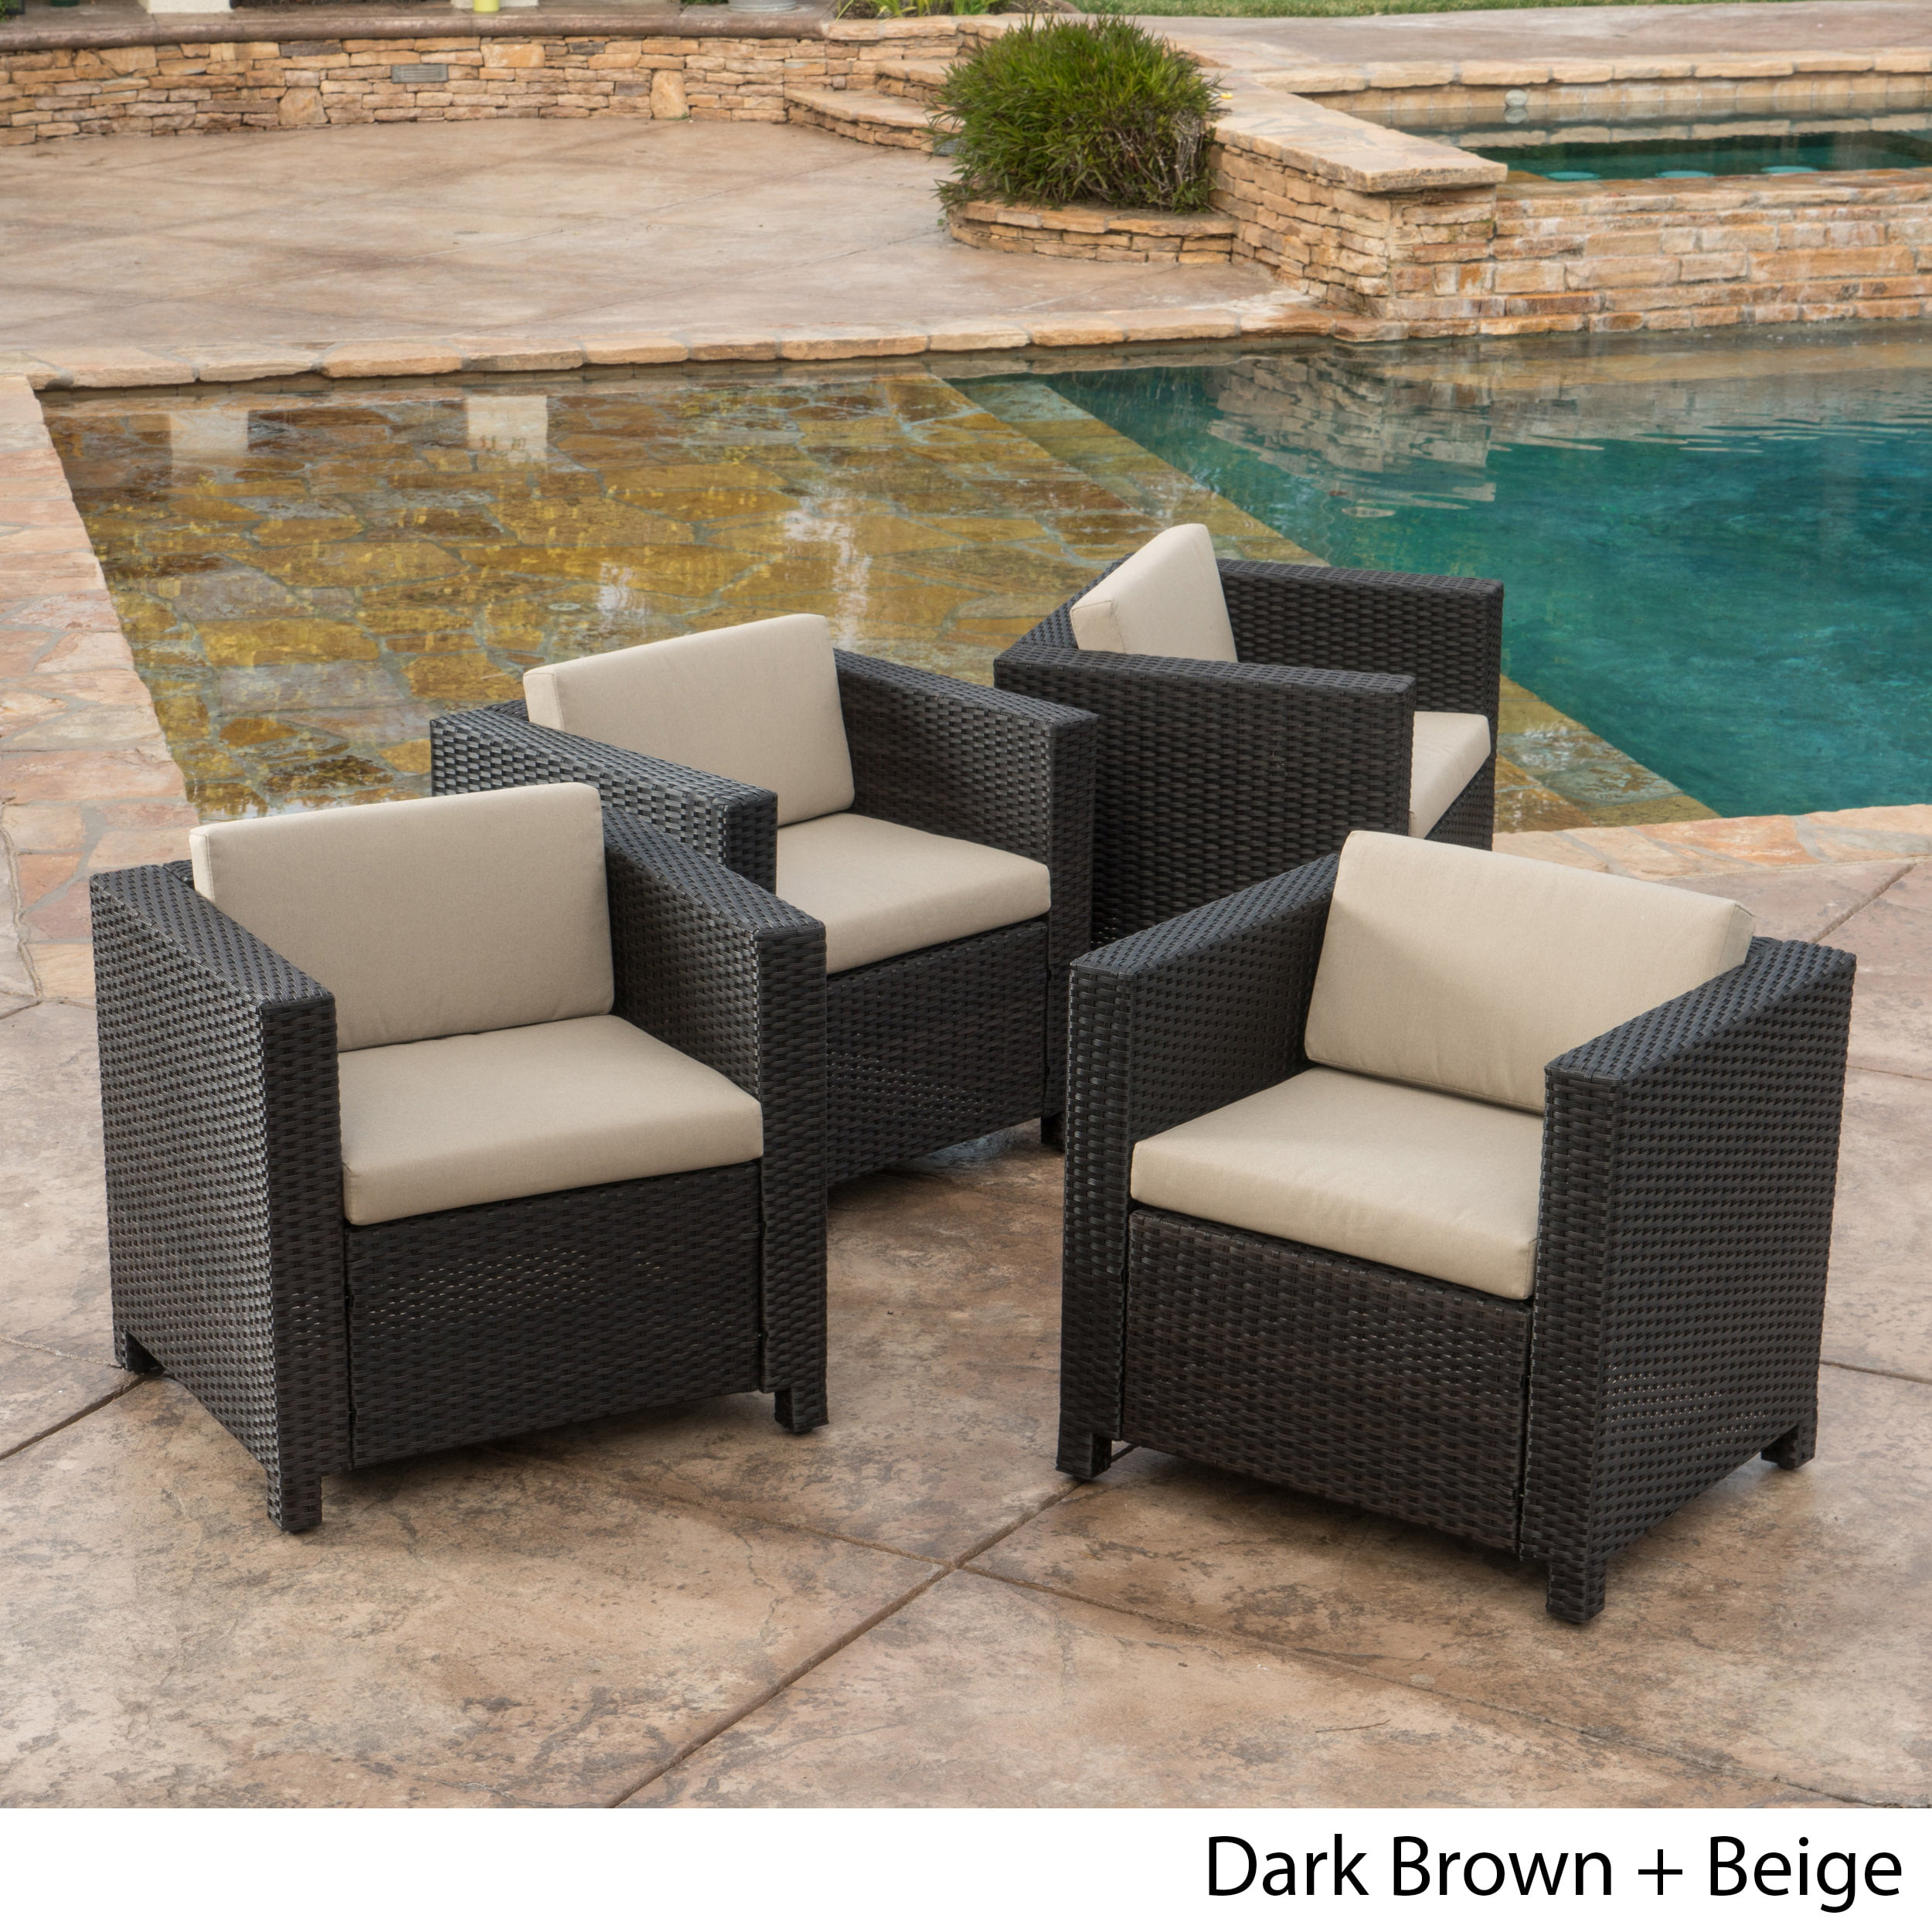 Raleigh Outdoor Wicker Club Chairs with Cushions, Set of 4, Multiple